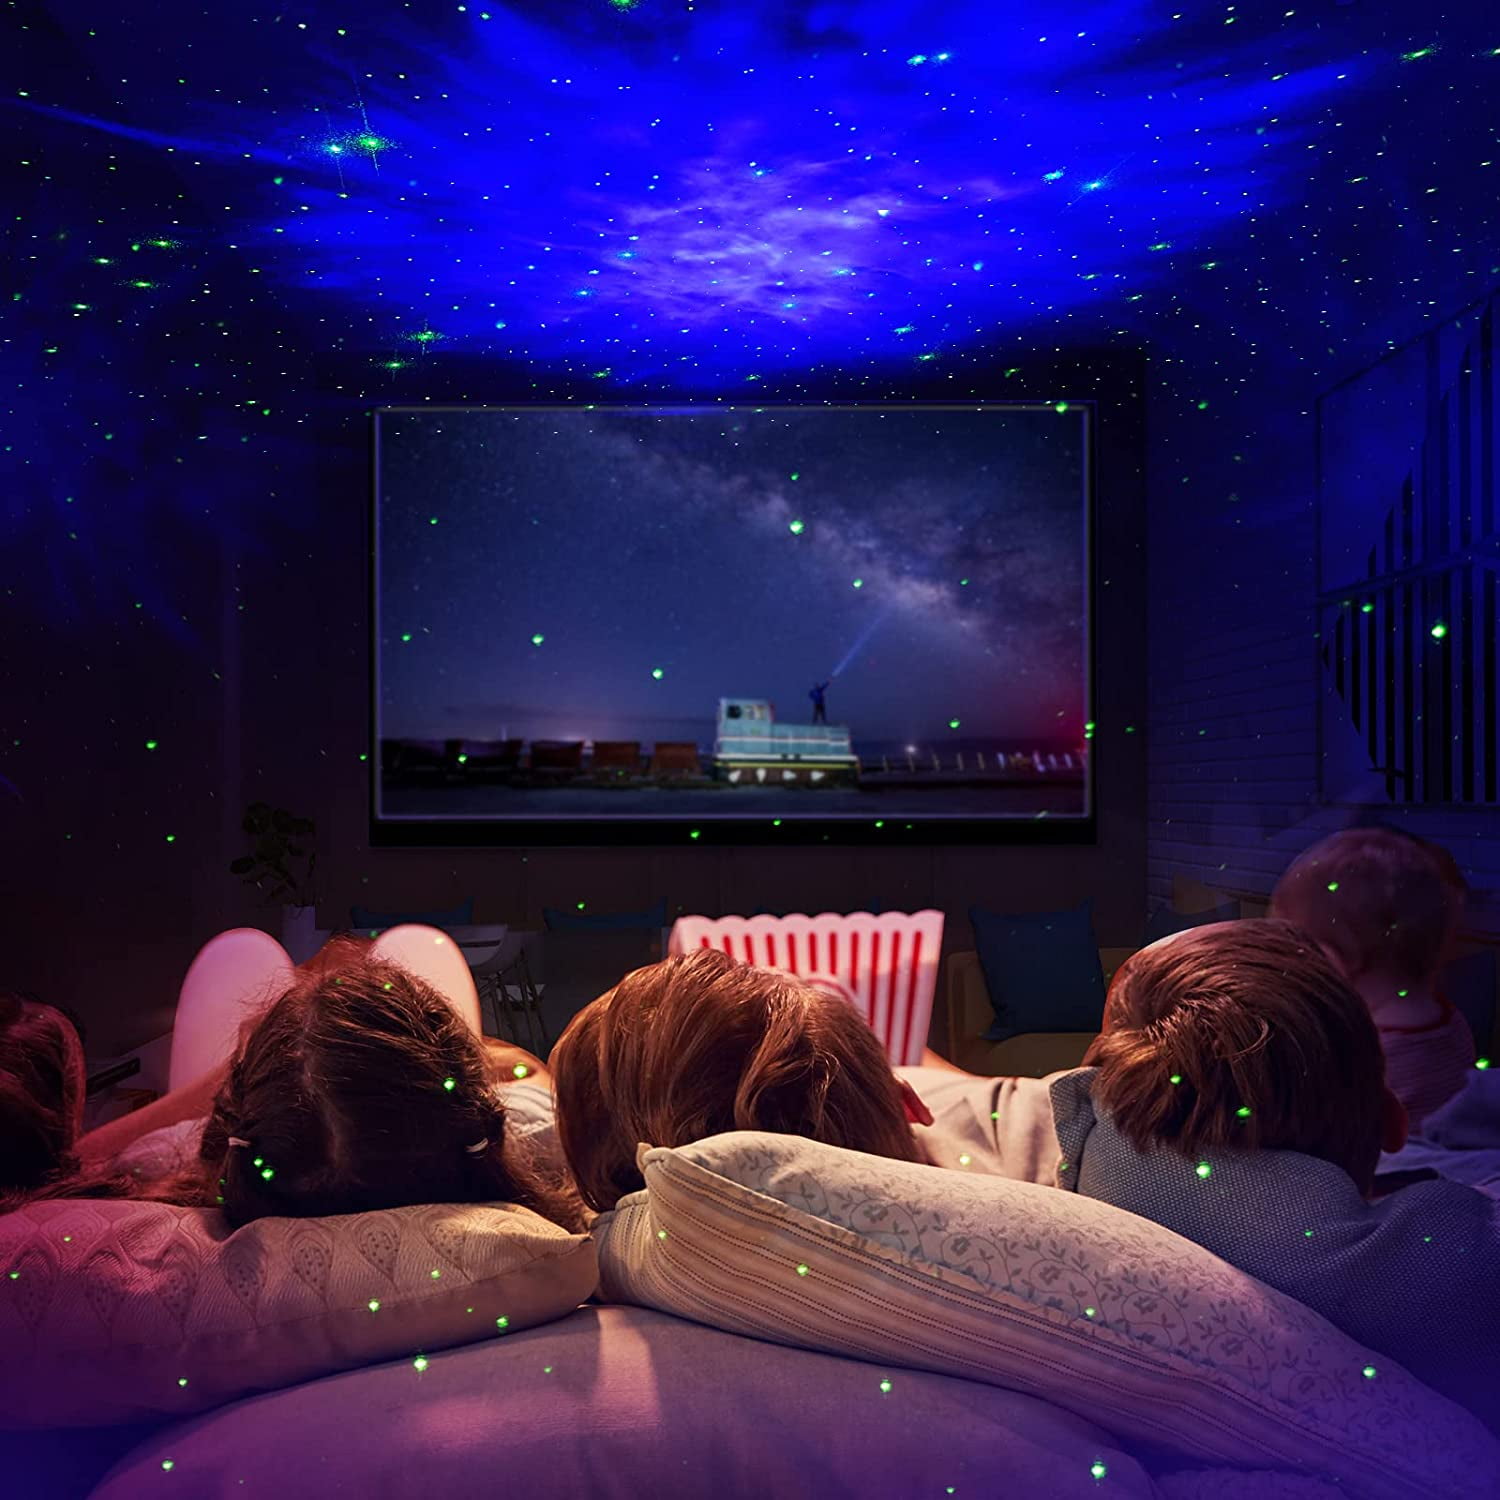 100PCS SIMAGENMAI Star Projector Galaxy Night Light - Astronaut Space Buddy  Projector, Starry Nebula Ceiling LED Lamp with Timer and Remote,Gifts for  Christmas, Birthdays, Valentine's Day etc. 